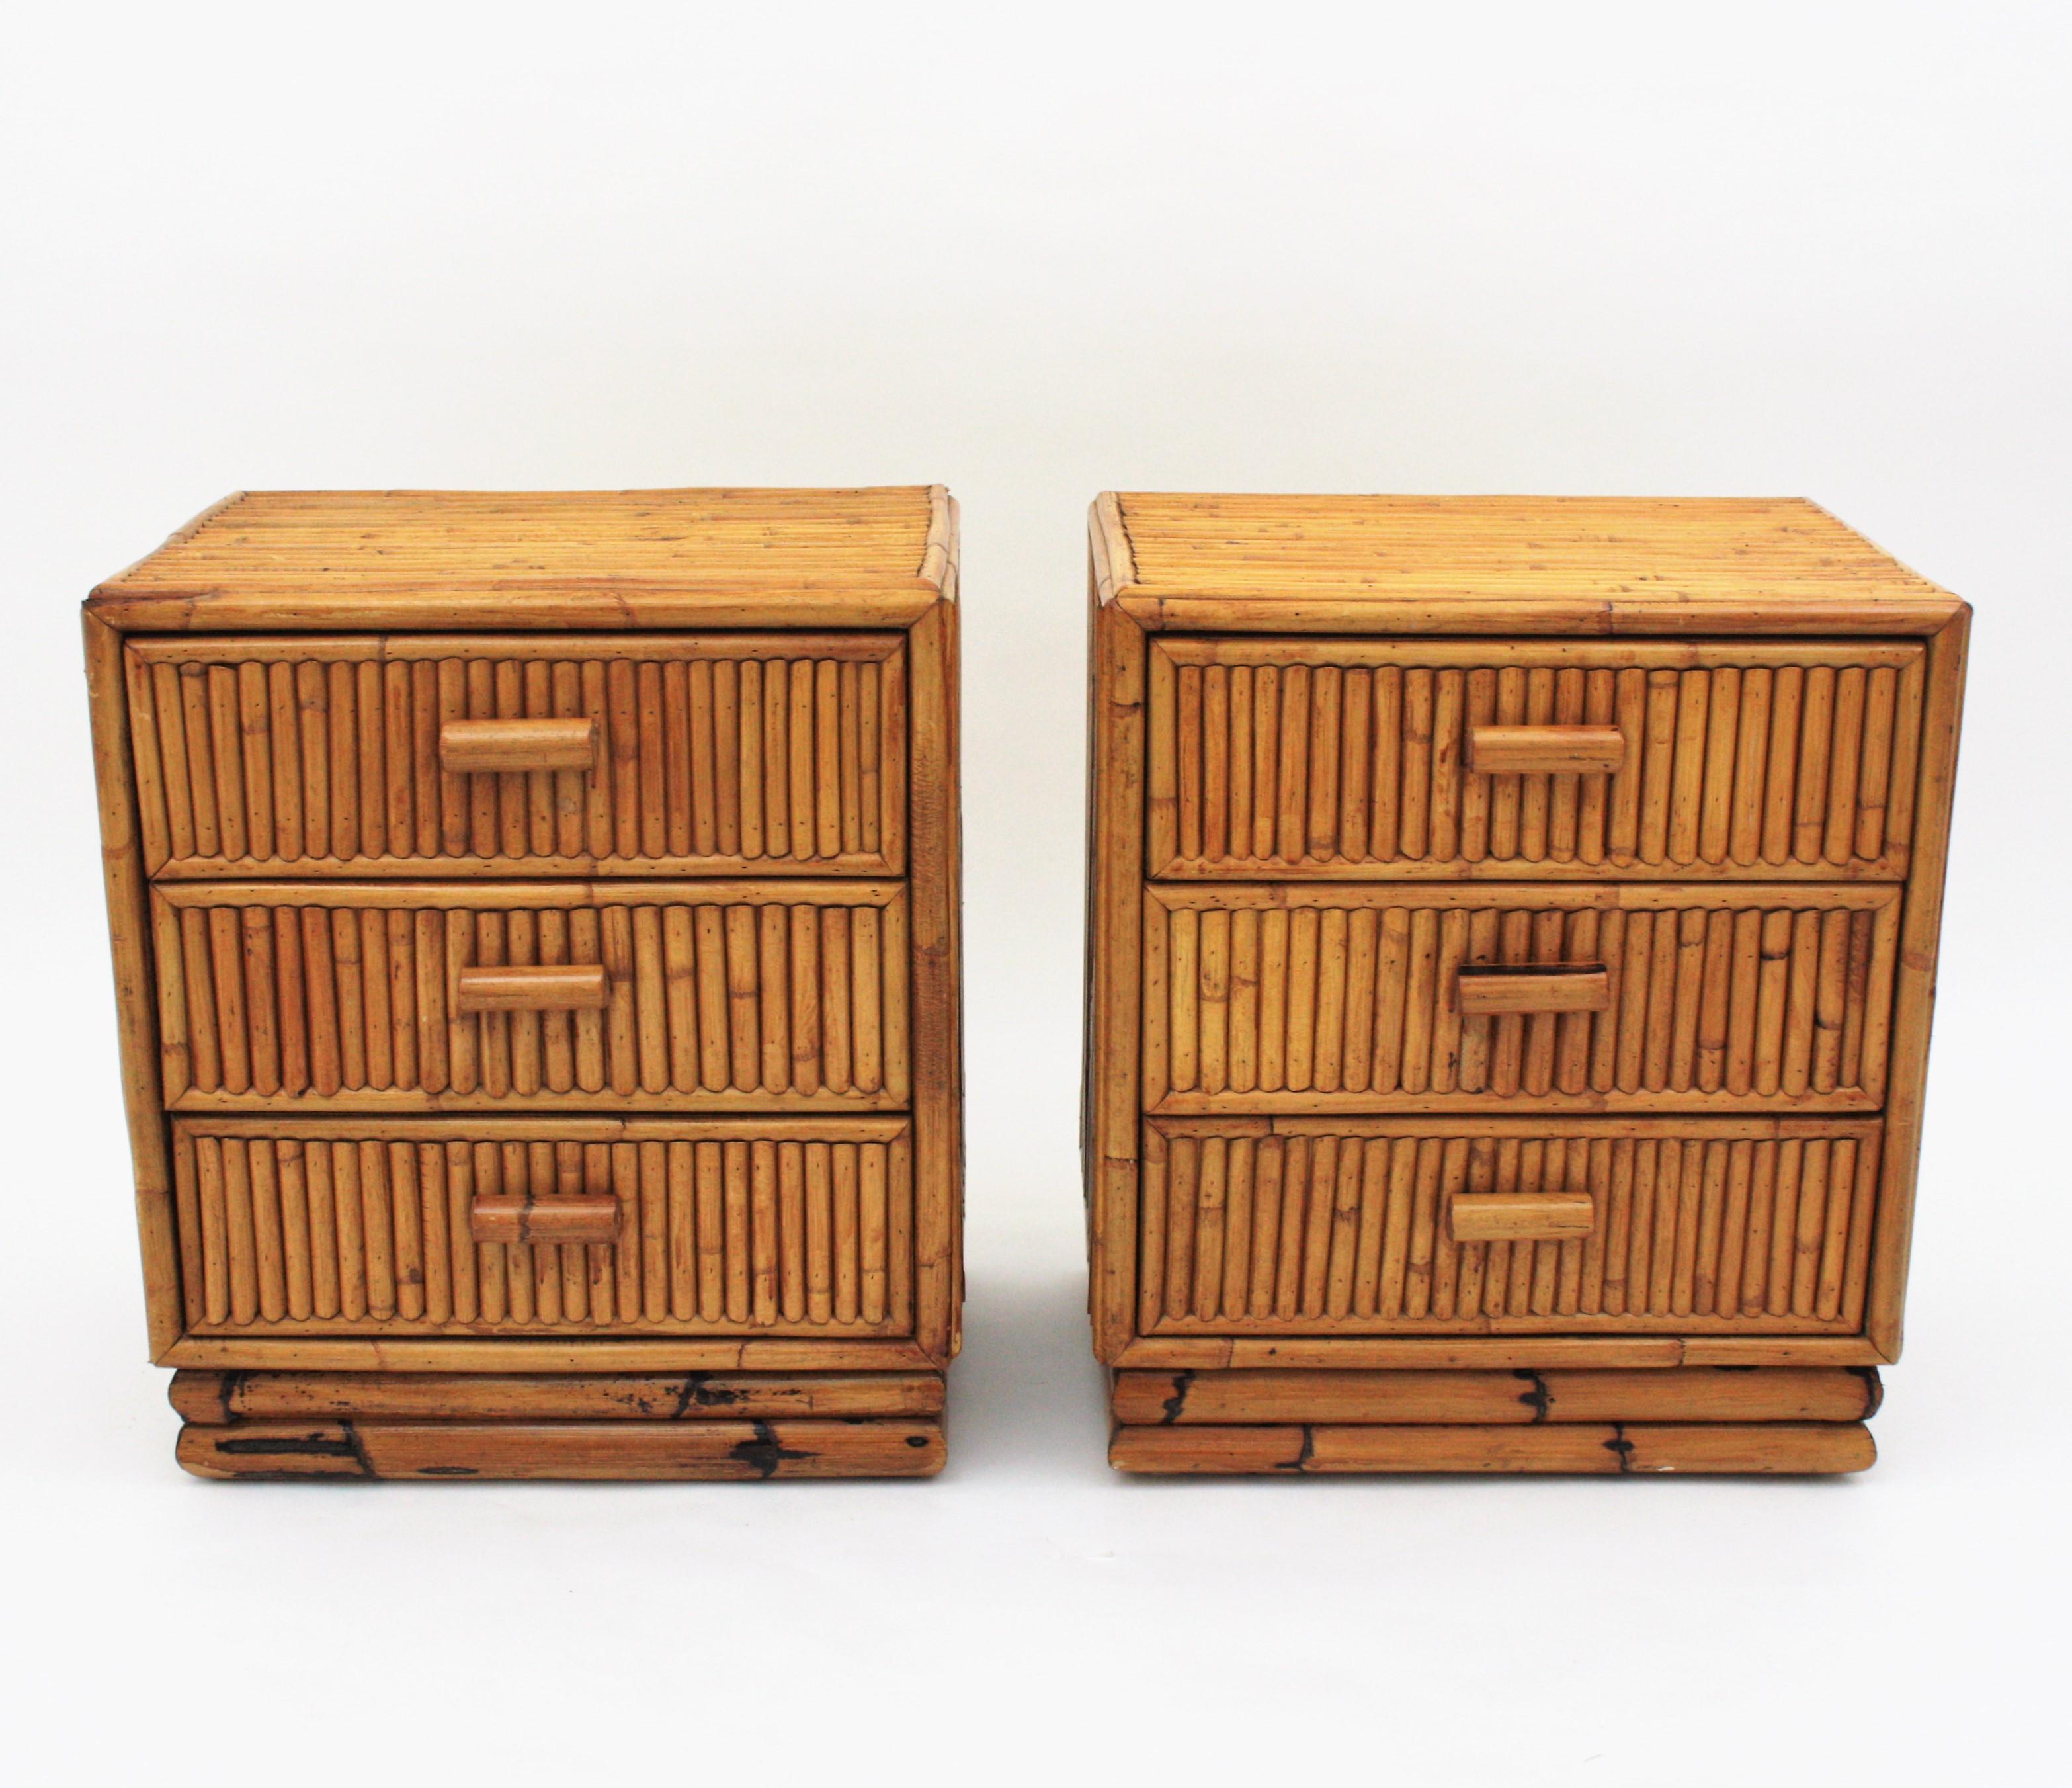 Pair of Spanish modern bamboo three-drawer end table stands or small chests, 1970s
Beautiful pair of bamboo small chests, end tables or nightstands.
These small chests of drawers have a wood and bamboo construction. The top, sides and the front